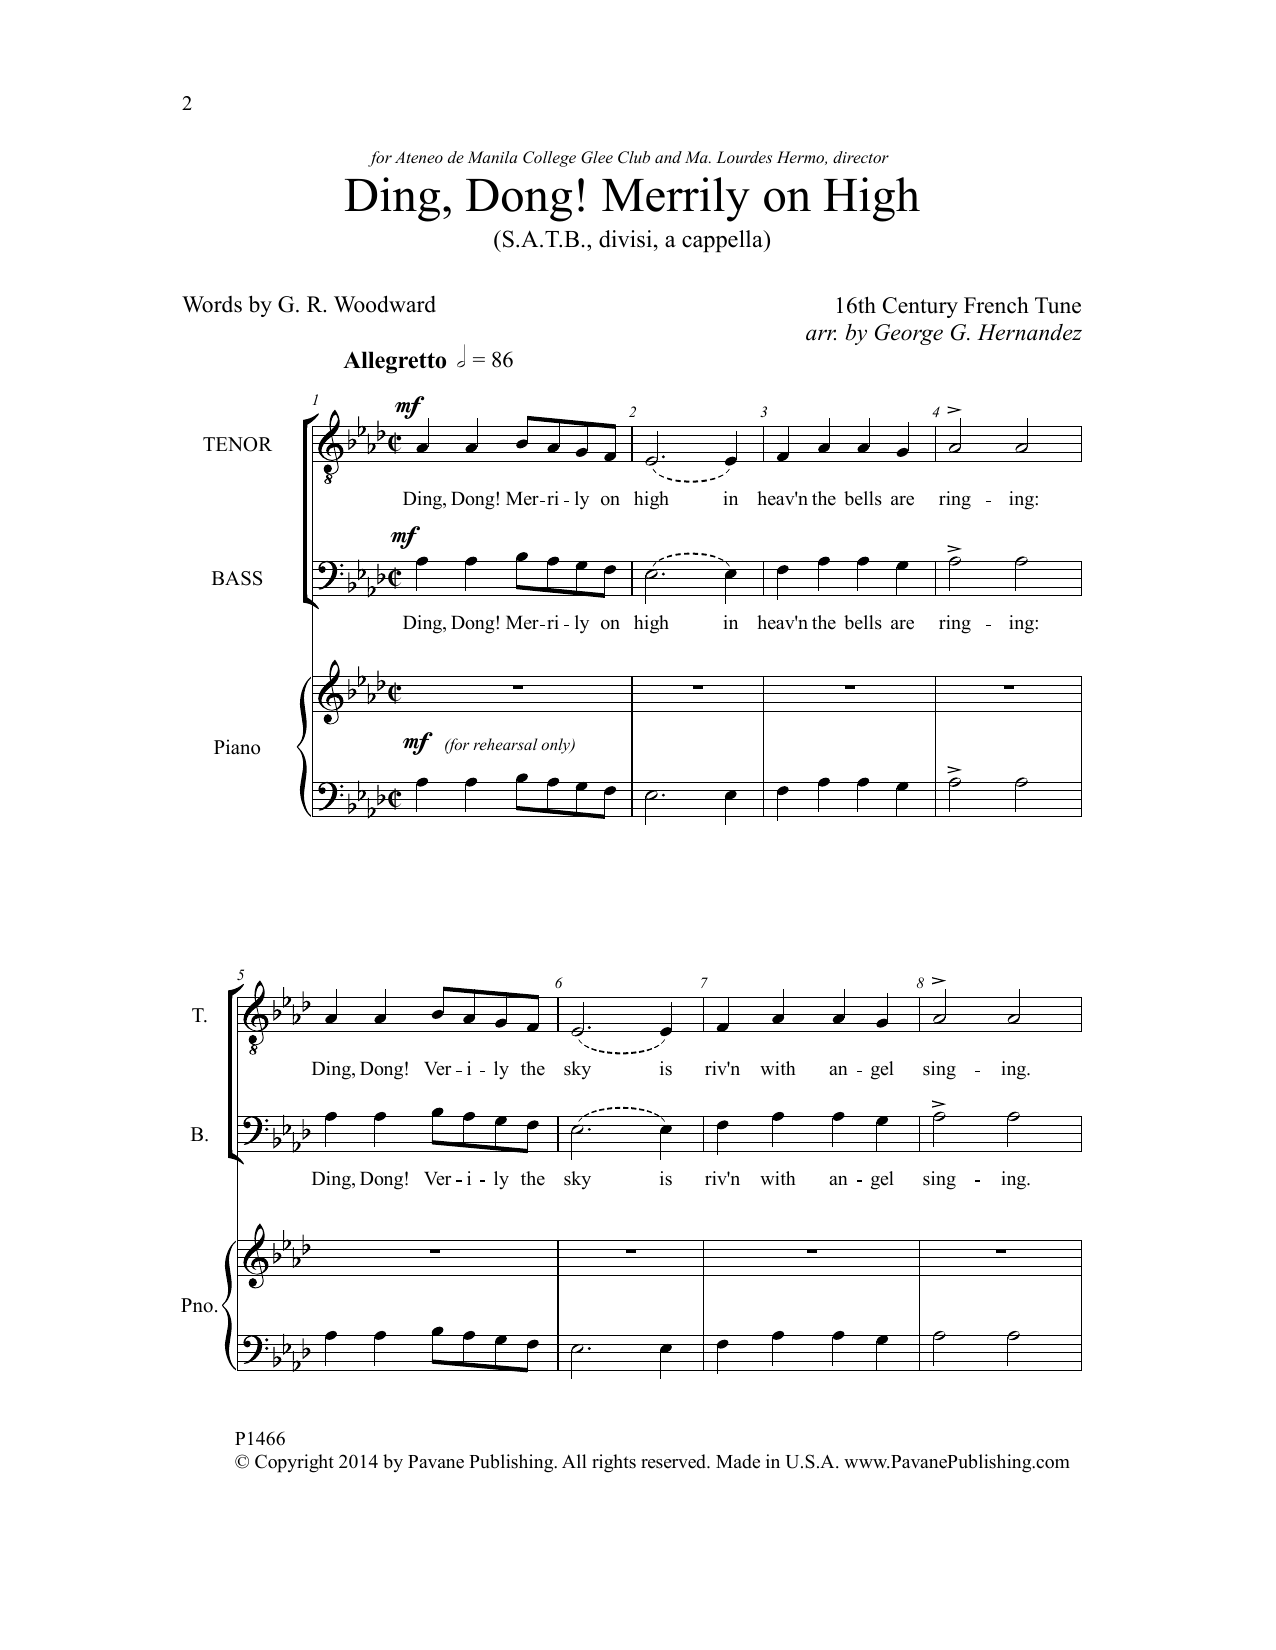 Download George G. Hernandez Ding, Dong! Merrily On High Sheet Music